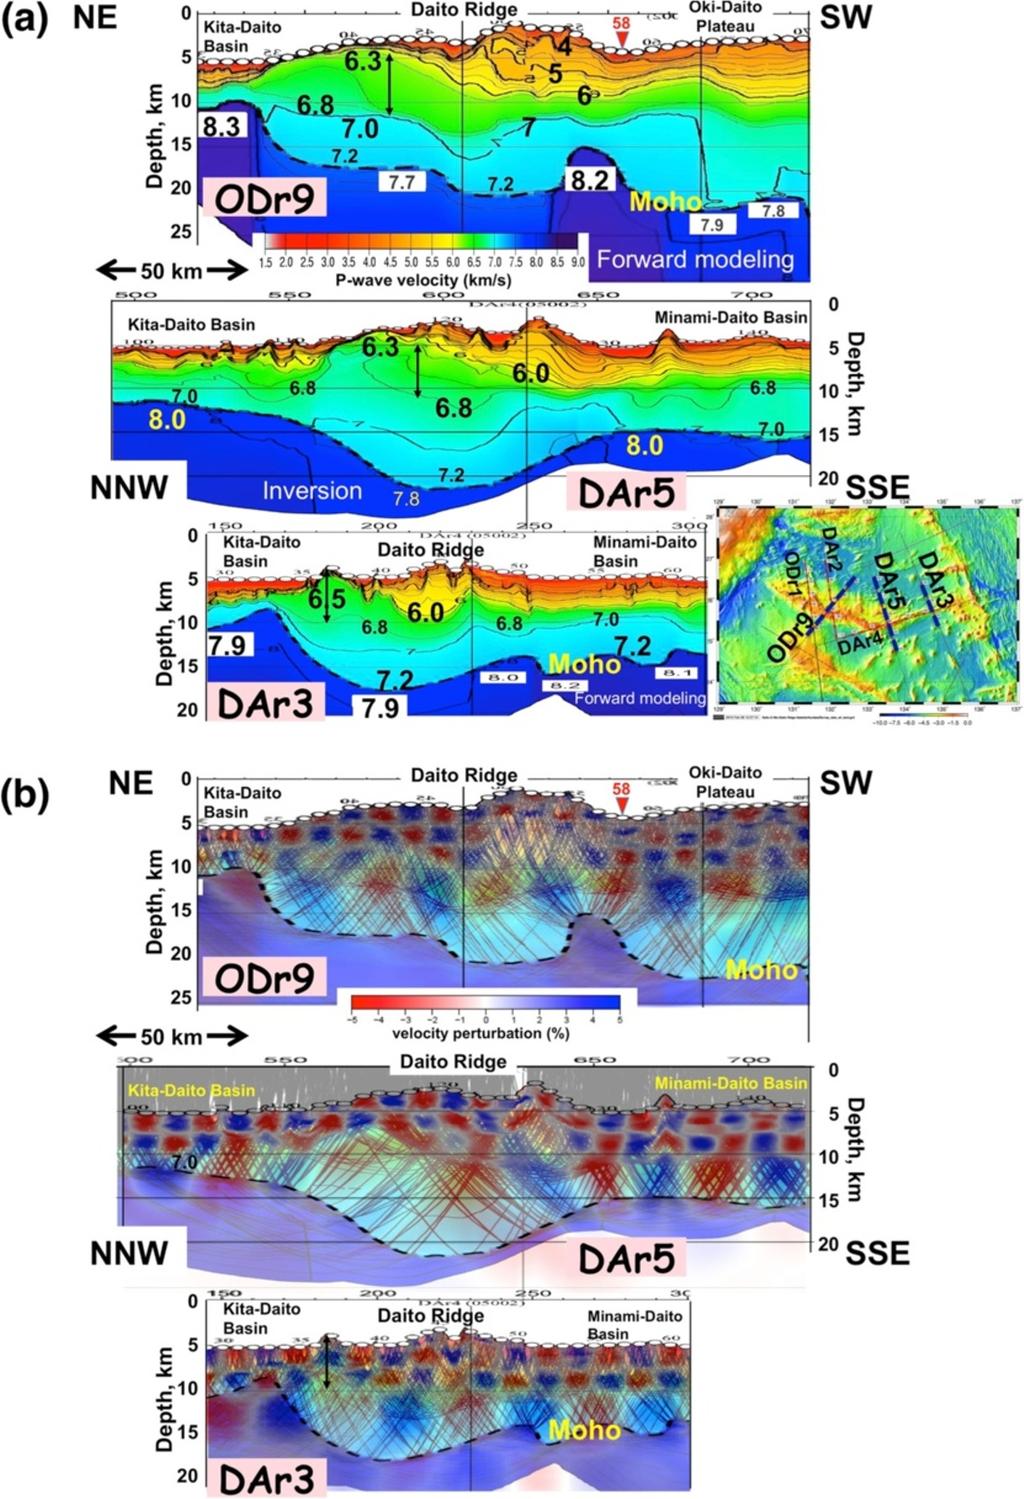 Nishizawa et al. Earth, Planets and Space 2014, 66:25 Page 8 of 16 Figure 6 Vp models of the Daito Ridge and checkerboard test results and ray coverage.